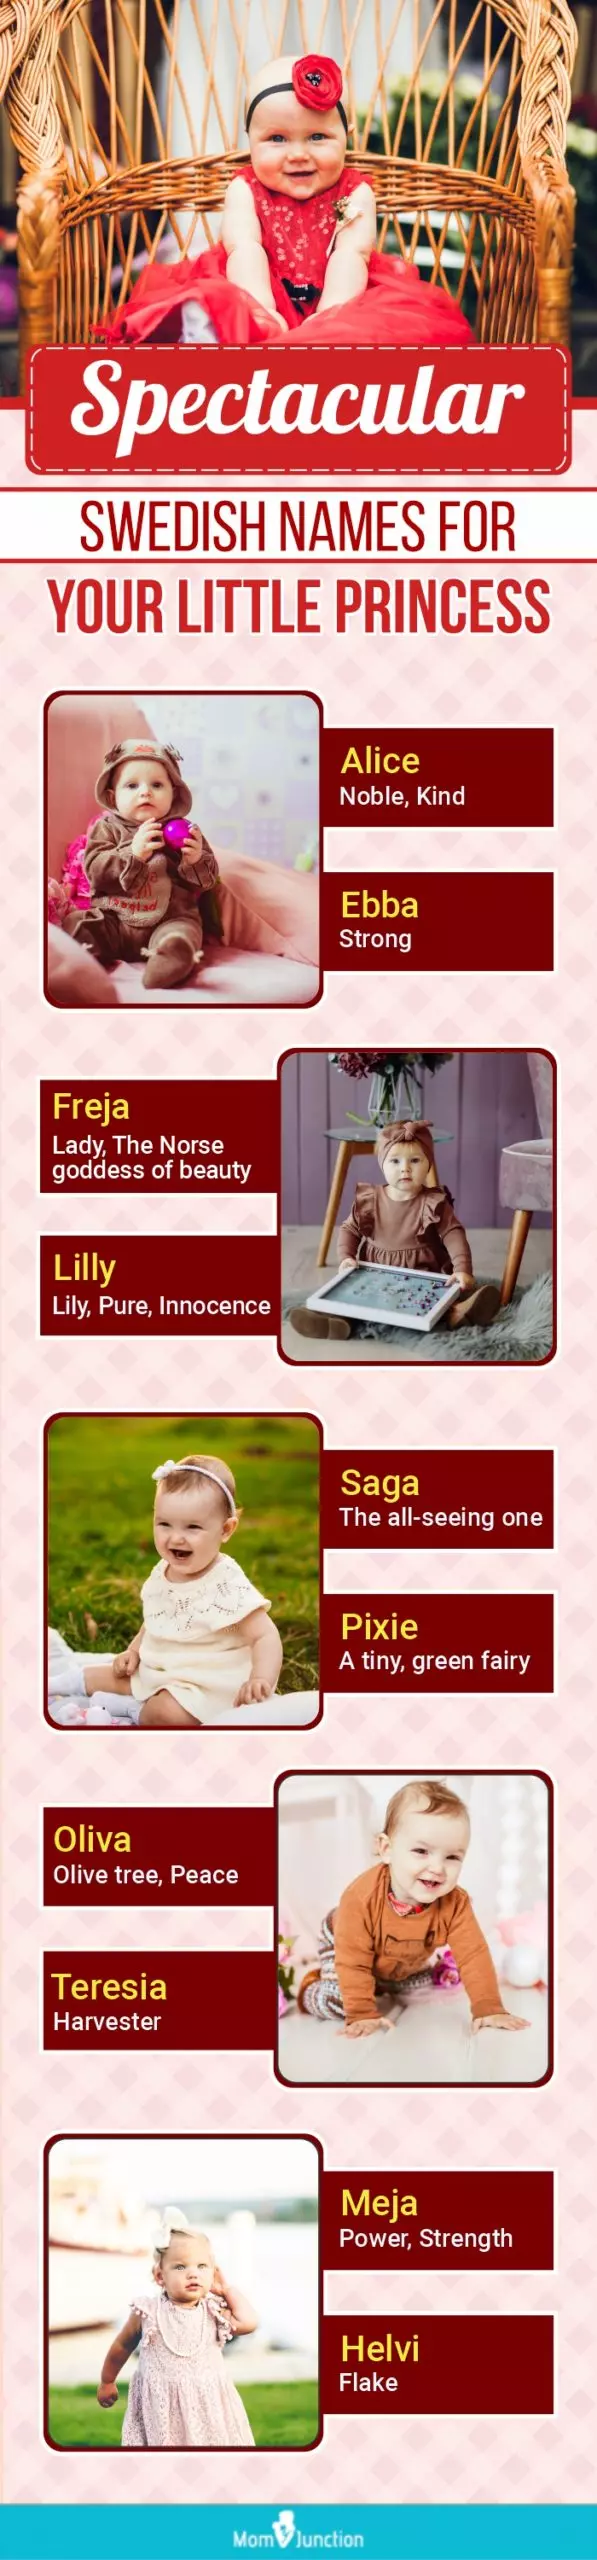 spectacular swedish names for your little princess (infographic)